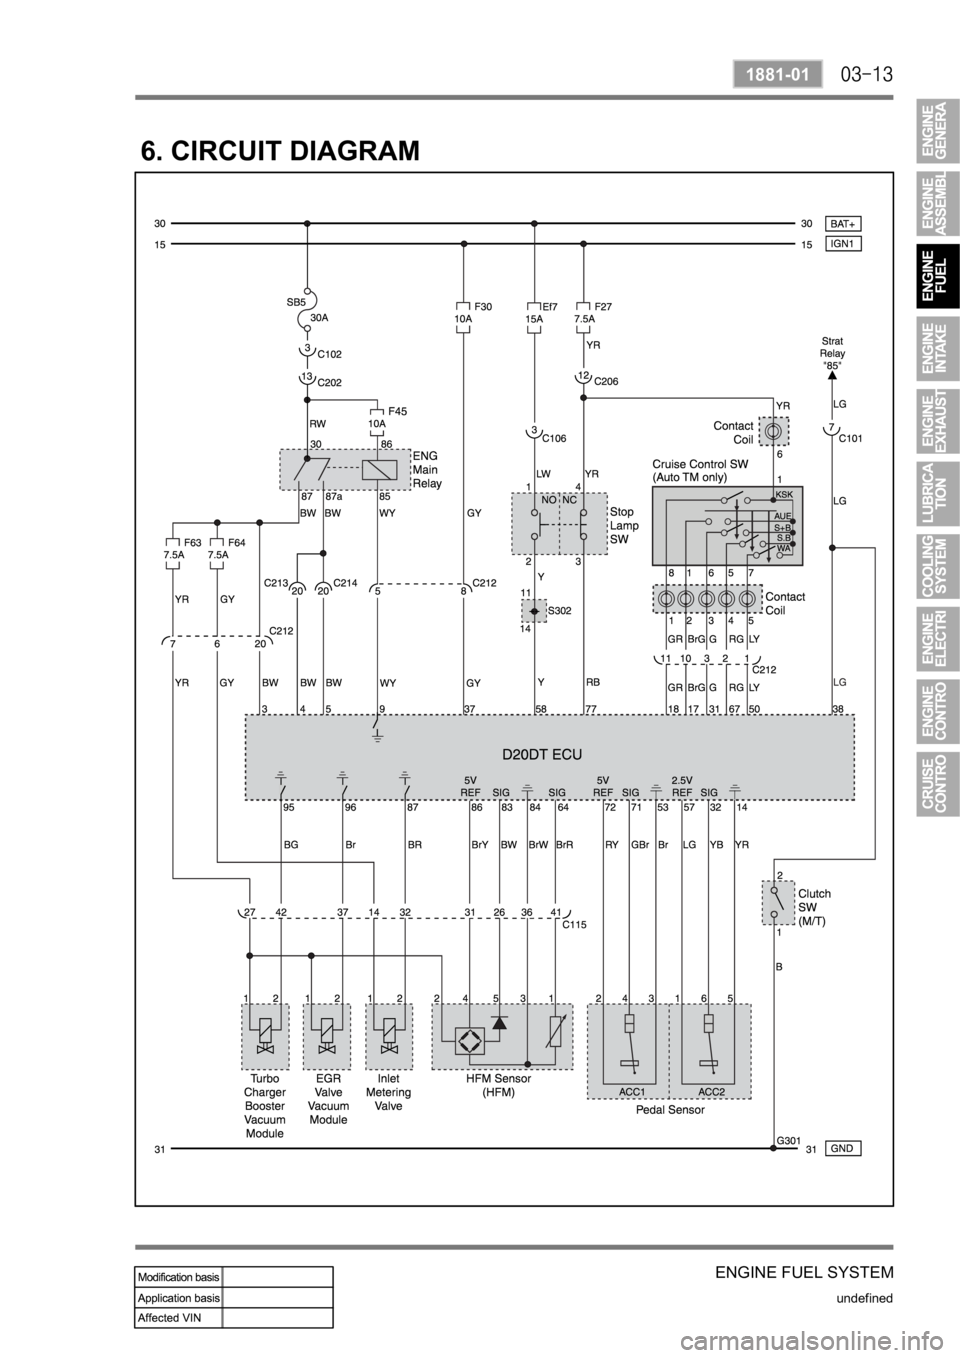 SSANGYONG KYRON 2010  Service Manual ENGINE FUEL SYSTEM
undefined
1881-01
6. CIRCUIT DIAGRAM 